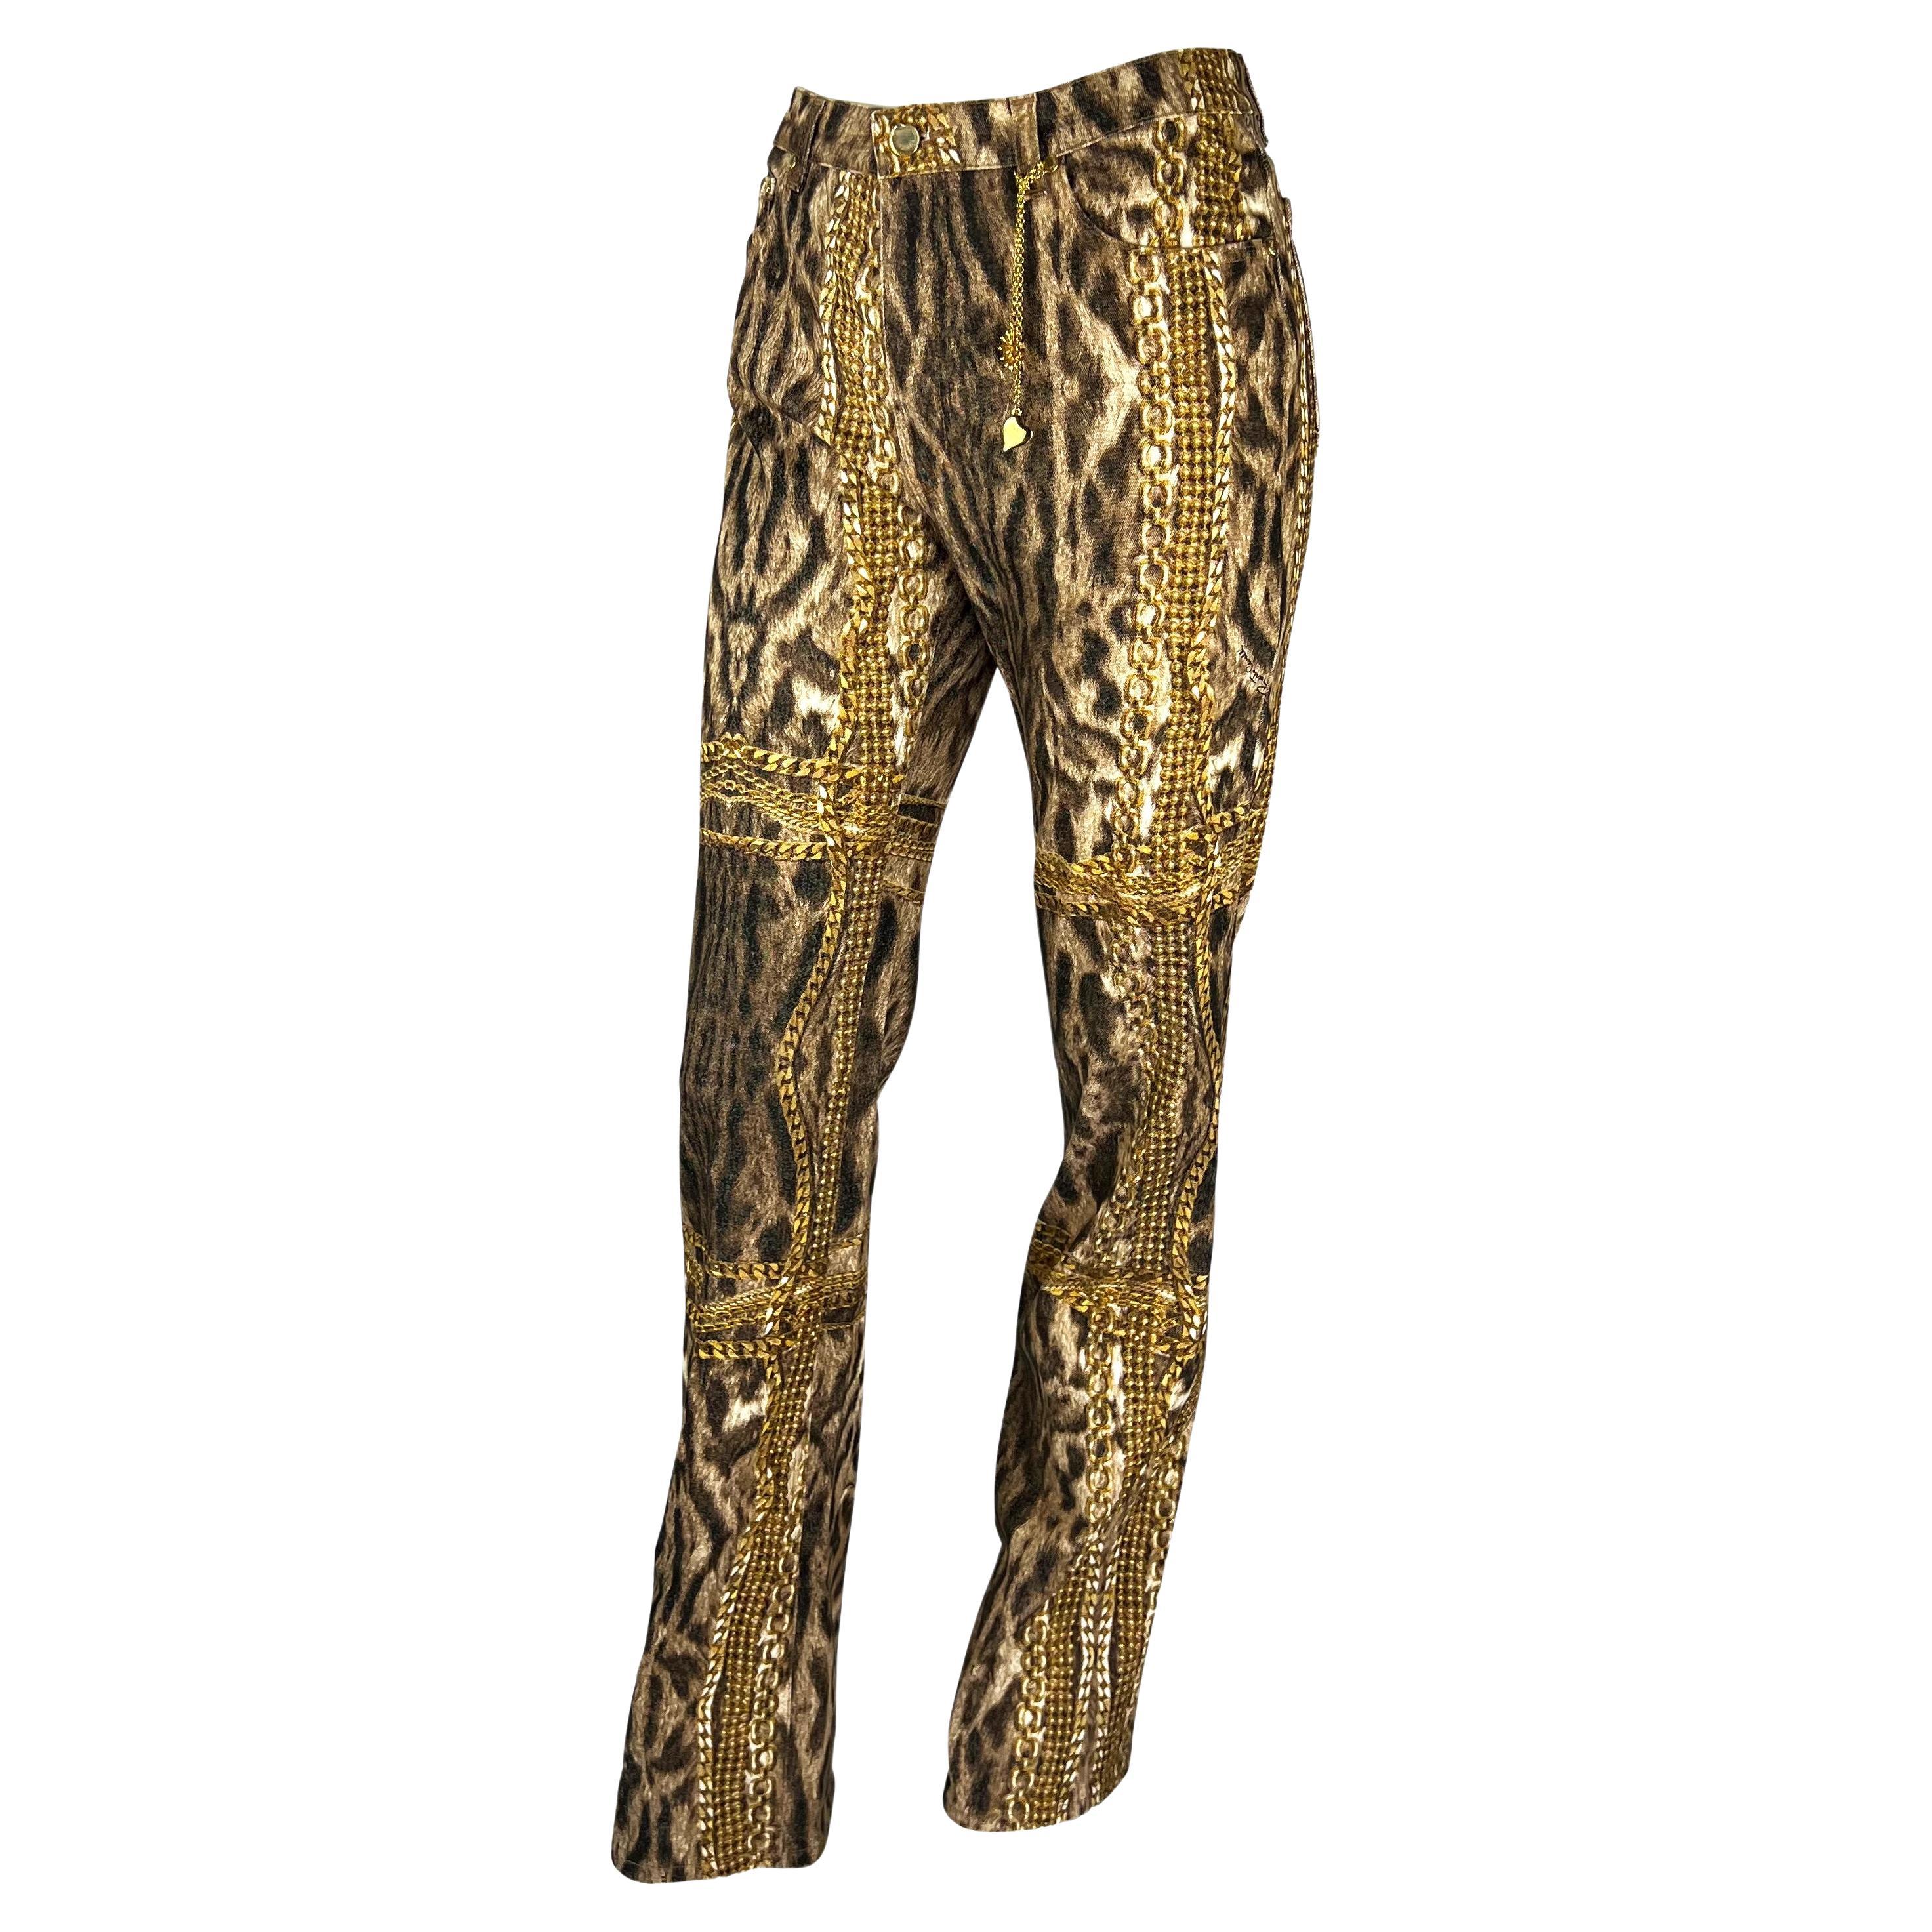 Presenting a pair of cheetah print denim Roberto Cavalli pants. From 2003, these fabulous pants feature a cheetah print with gold chains throughout. These pants are made complete with a metal gold-tone sun and heart charm at the front belt loop. The